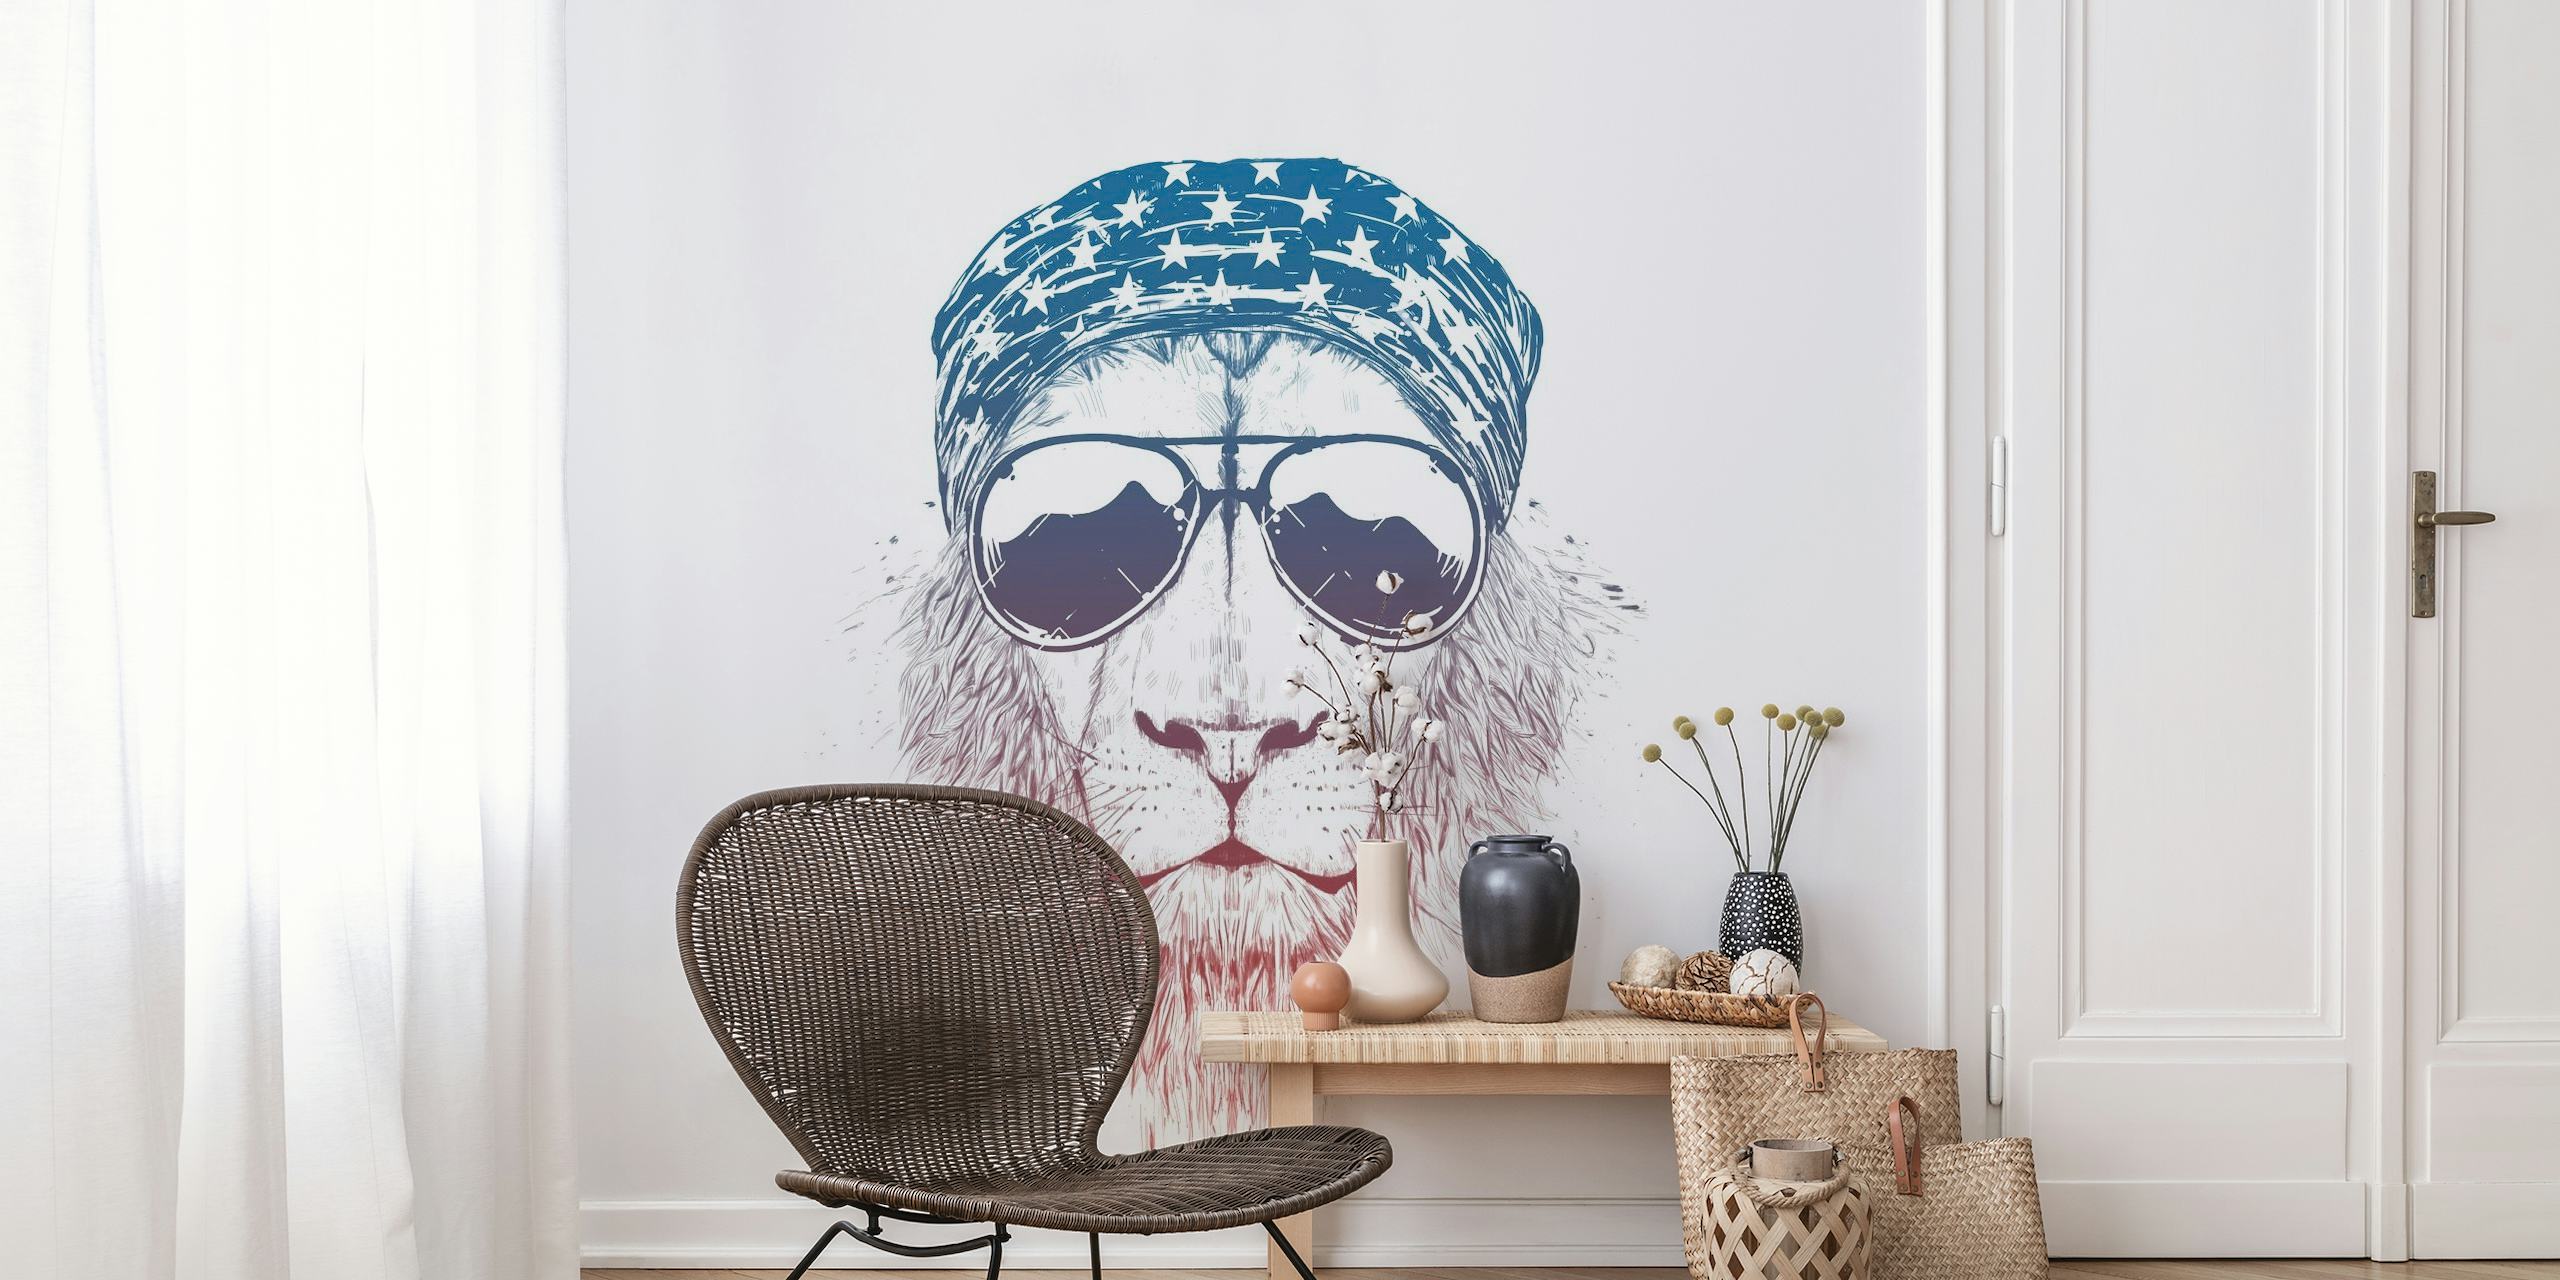 Stylized wild lion wall mural with contemporary graphic elements and a cool demeanor